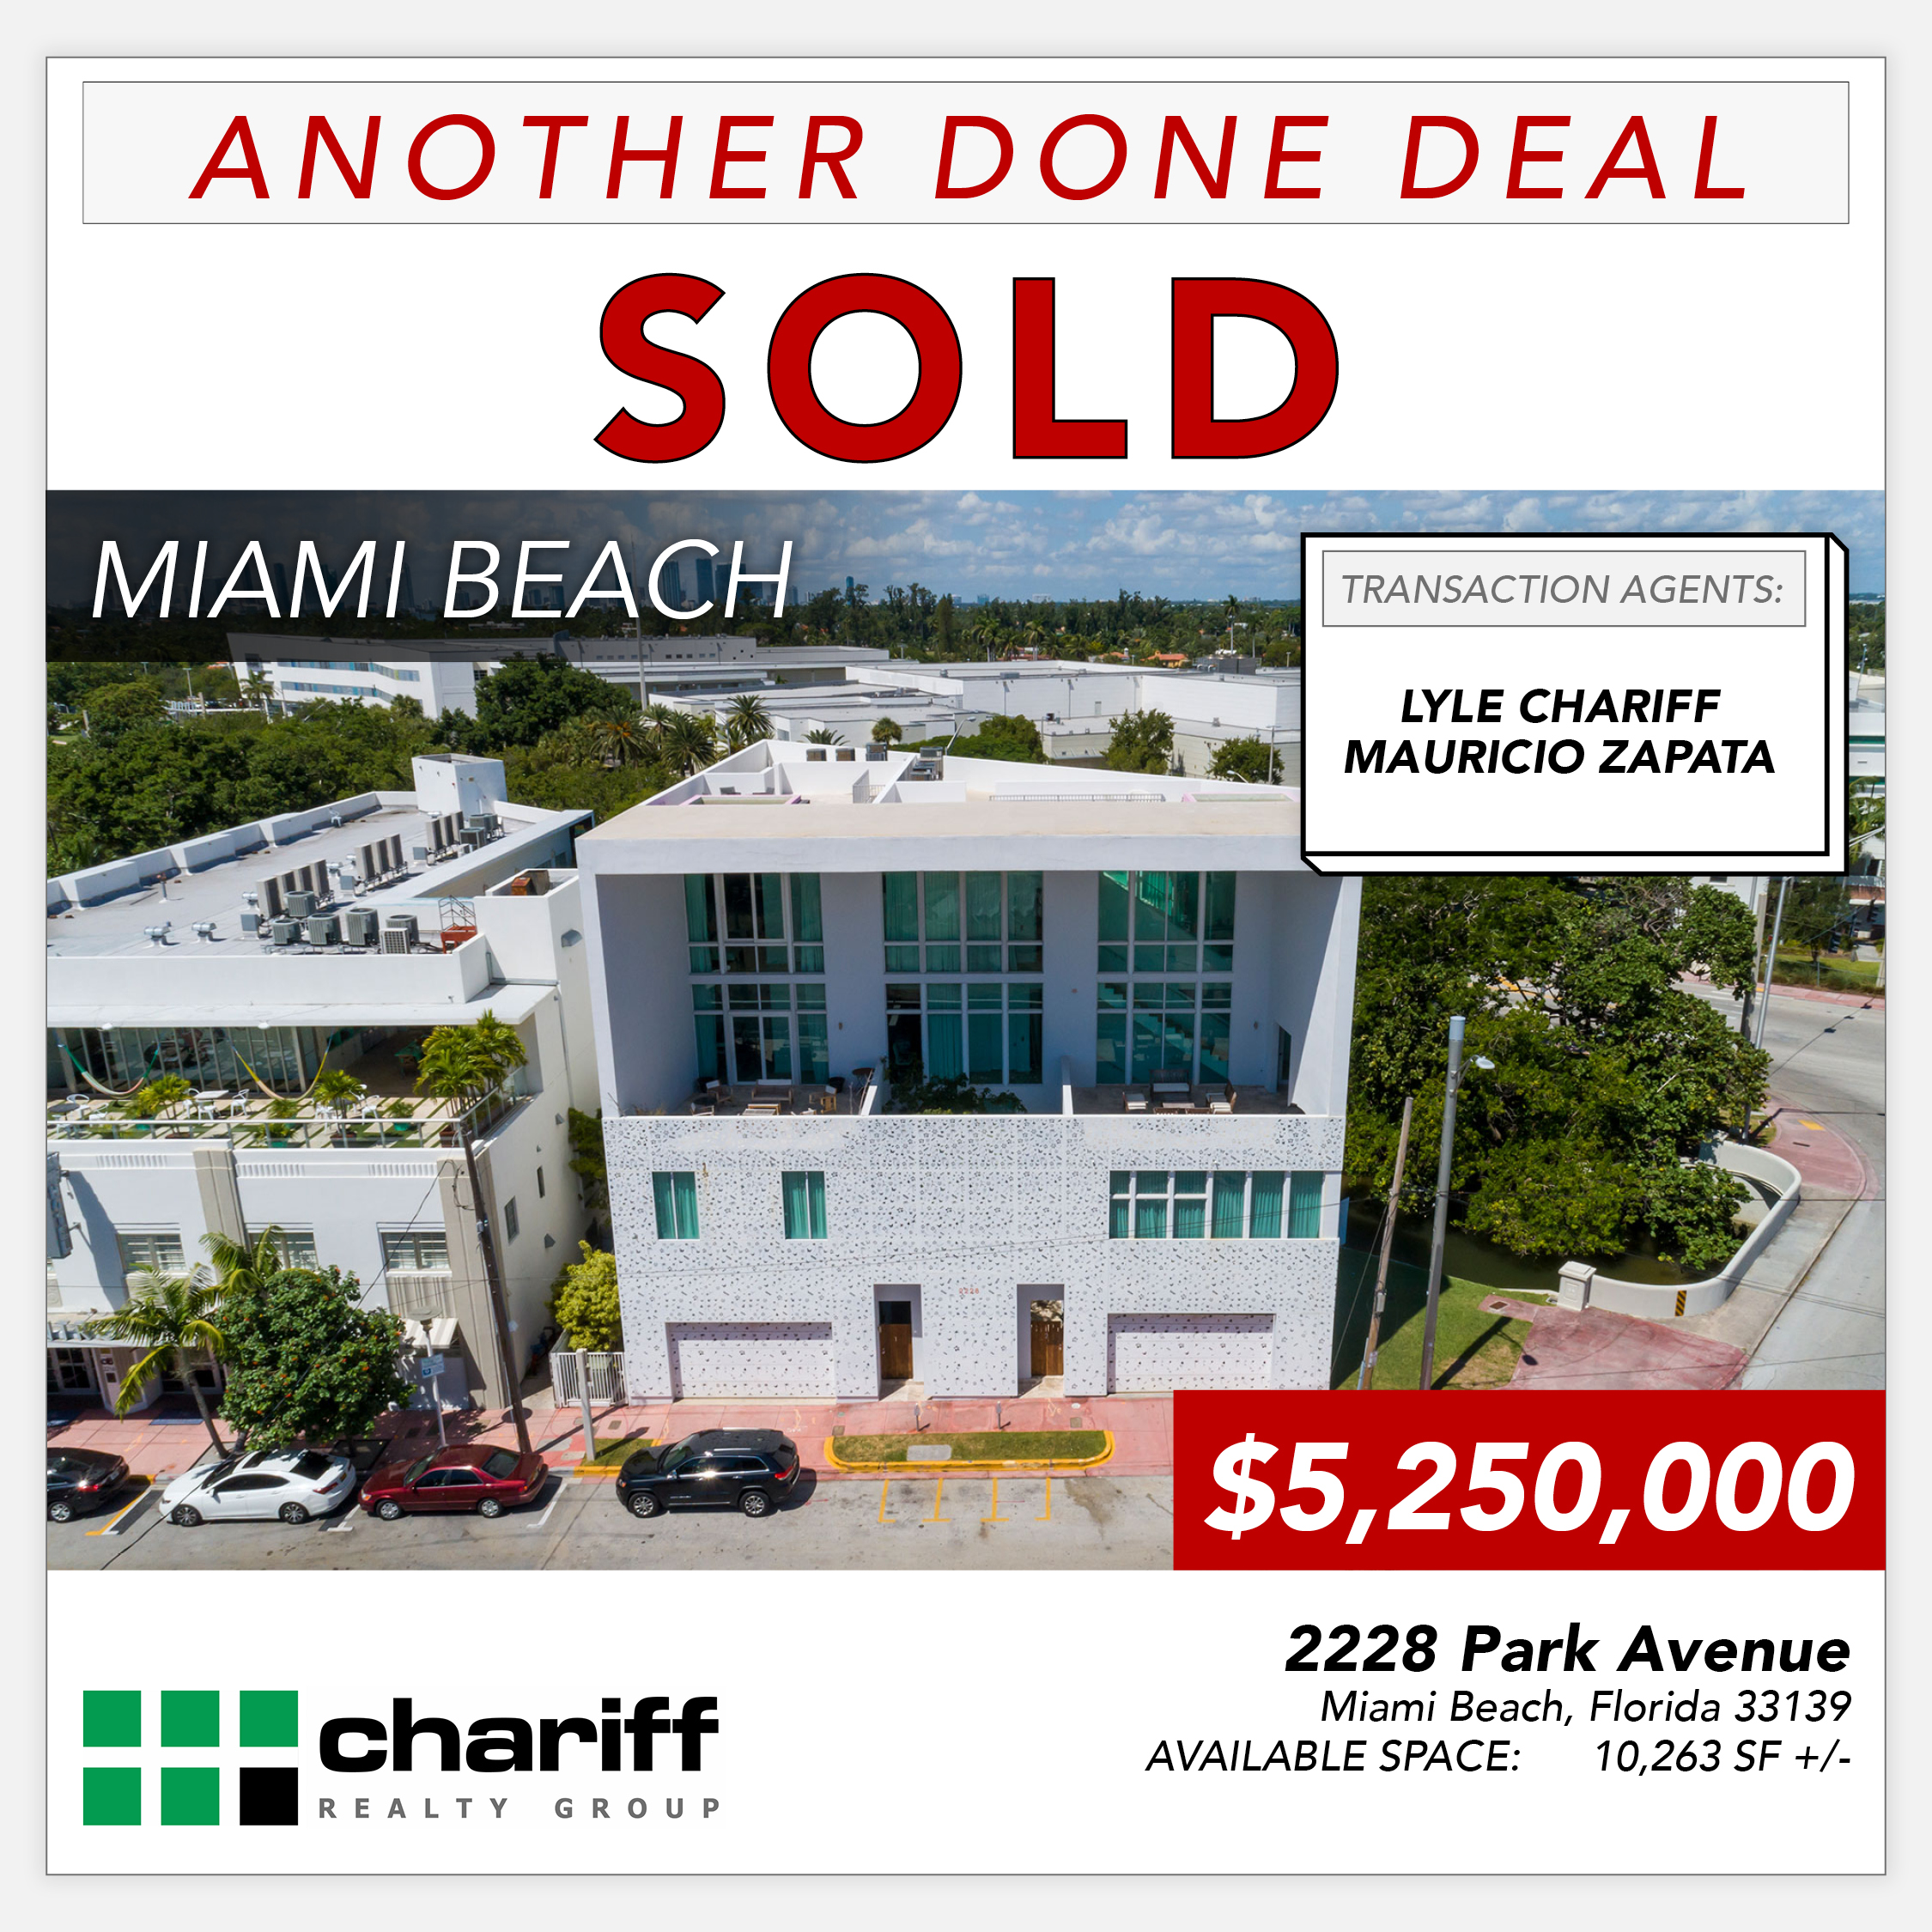 2228 Park Avenue- Another Done Deal-Sold-Wynwood-Miami Beach-Florida-33139-Chariff Realty Group